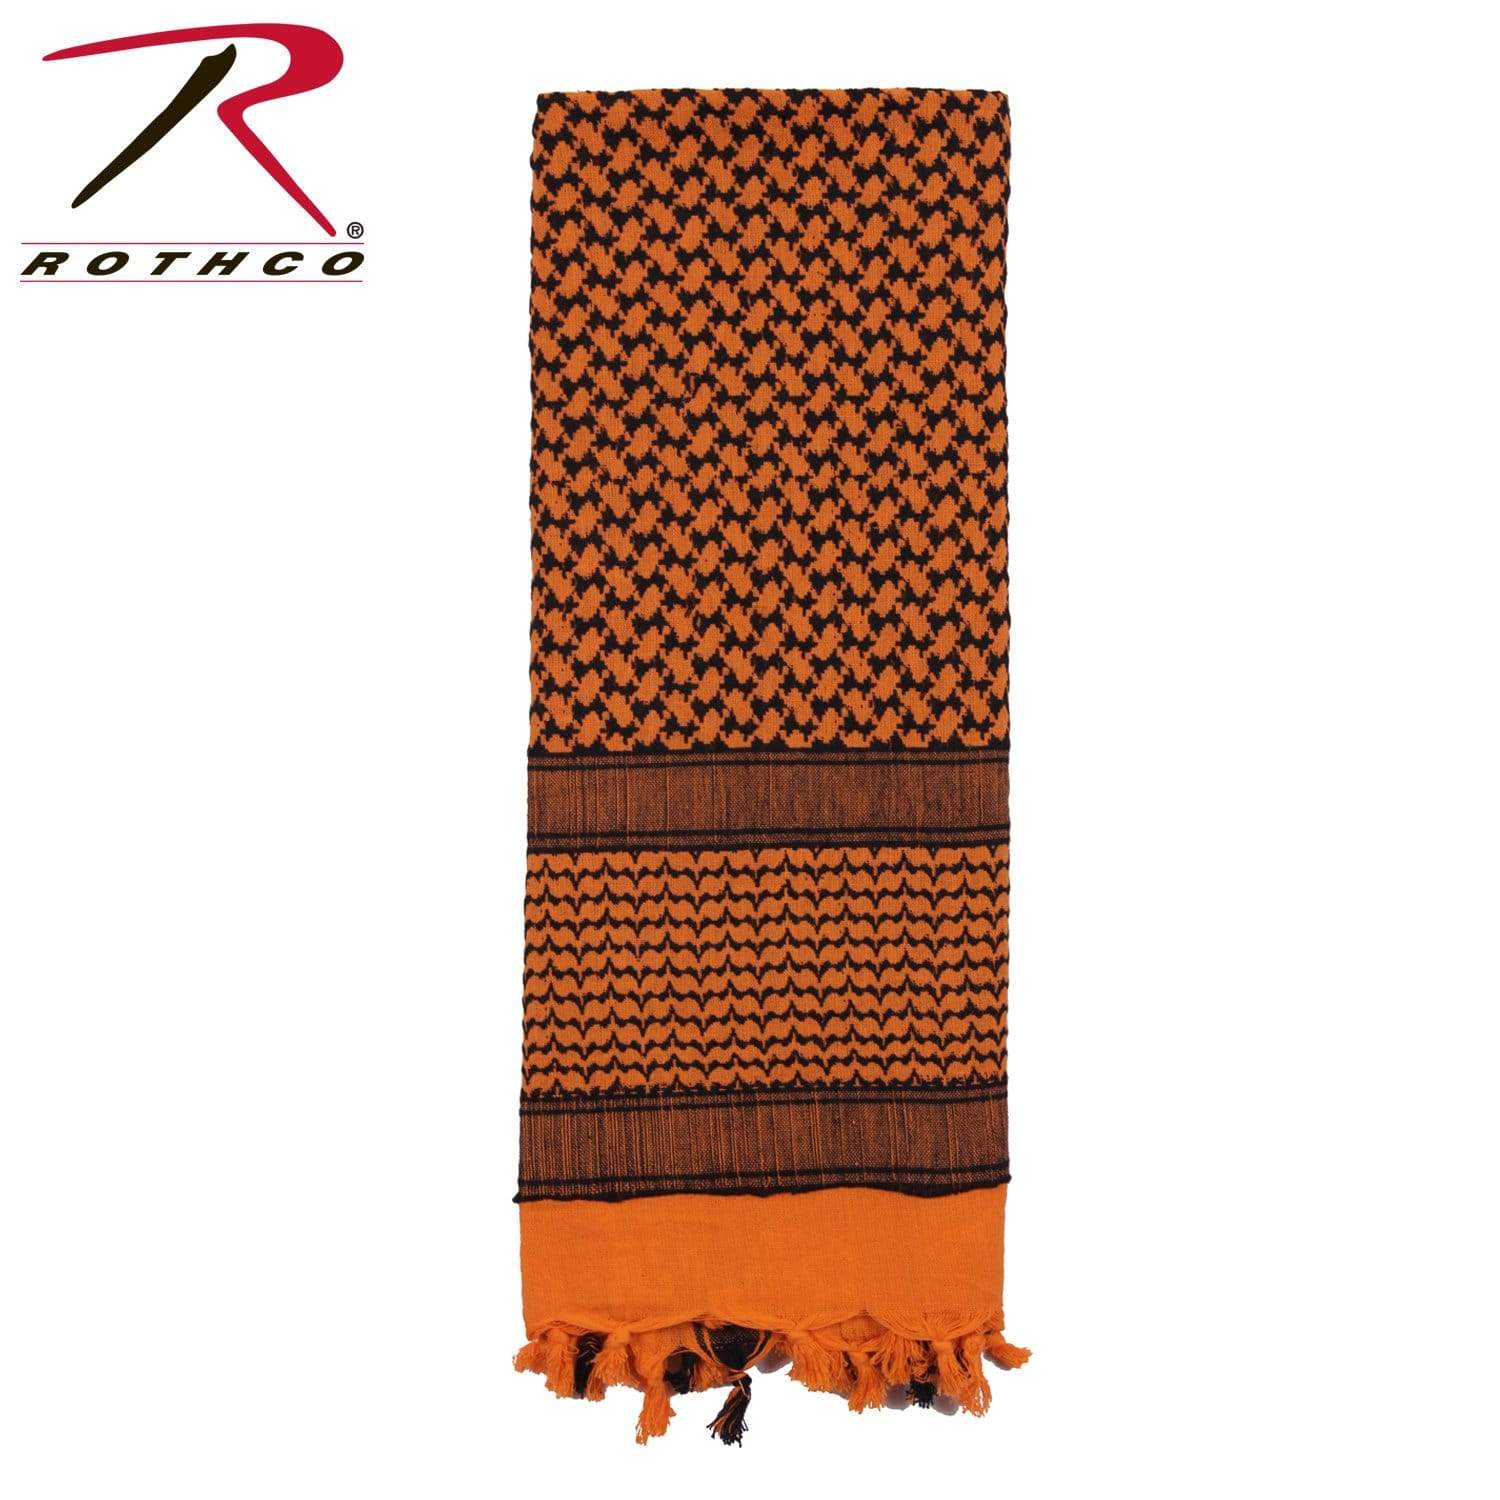 Rothco Shemagh Tactical Desert Keffiyeh Scarf - Orange - Eminent Paintball And Airsoft